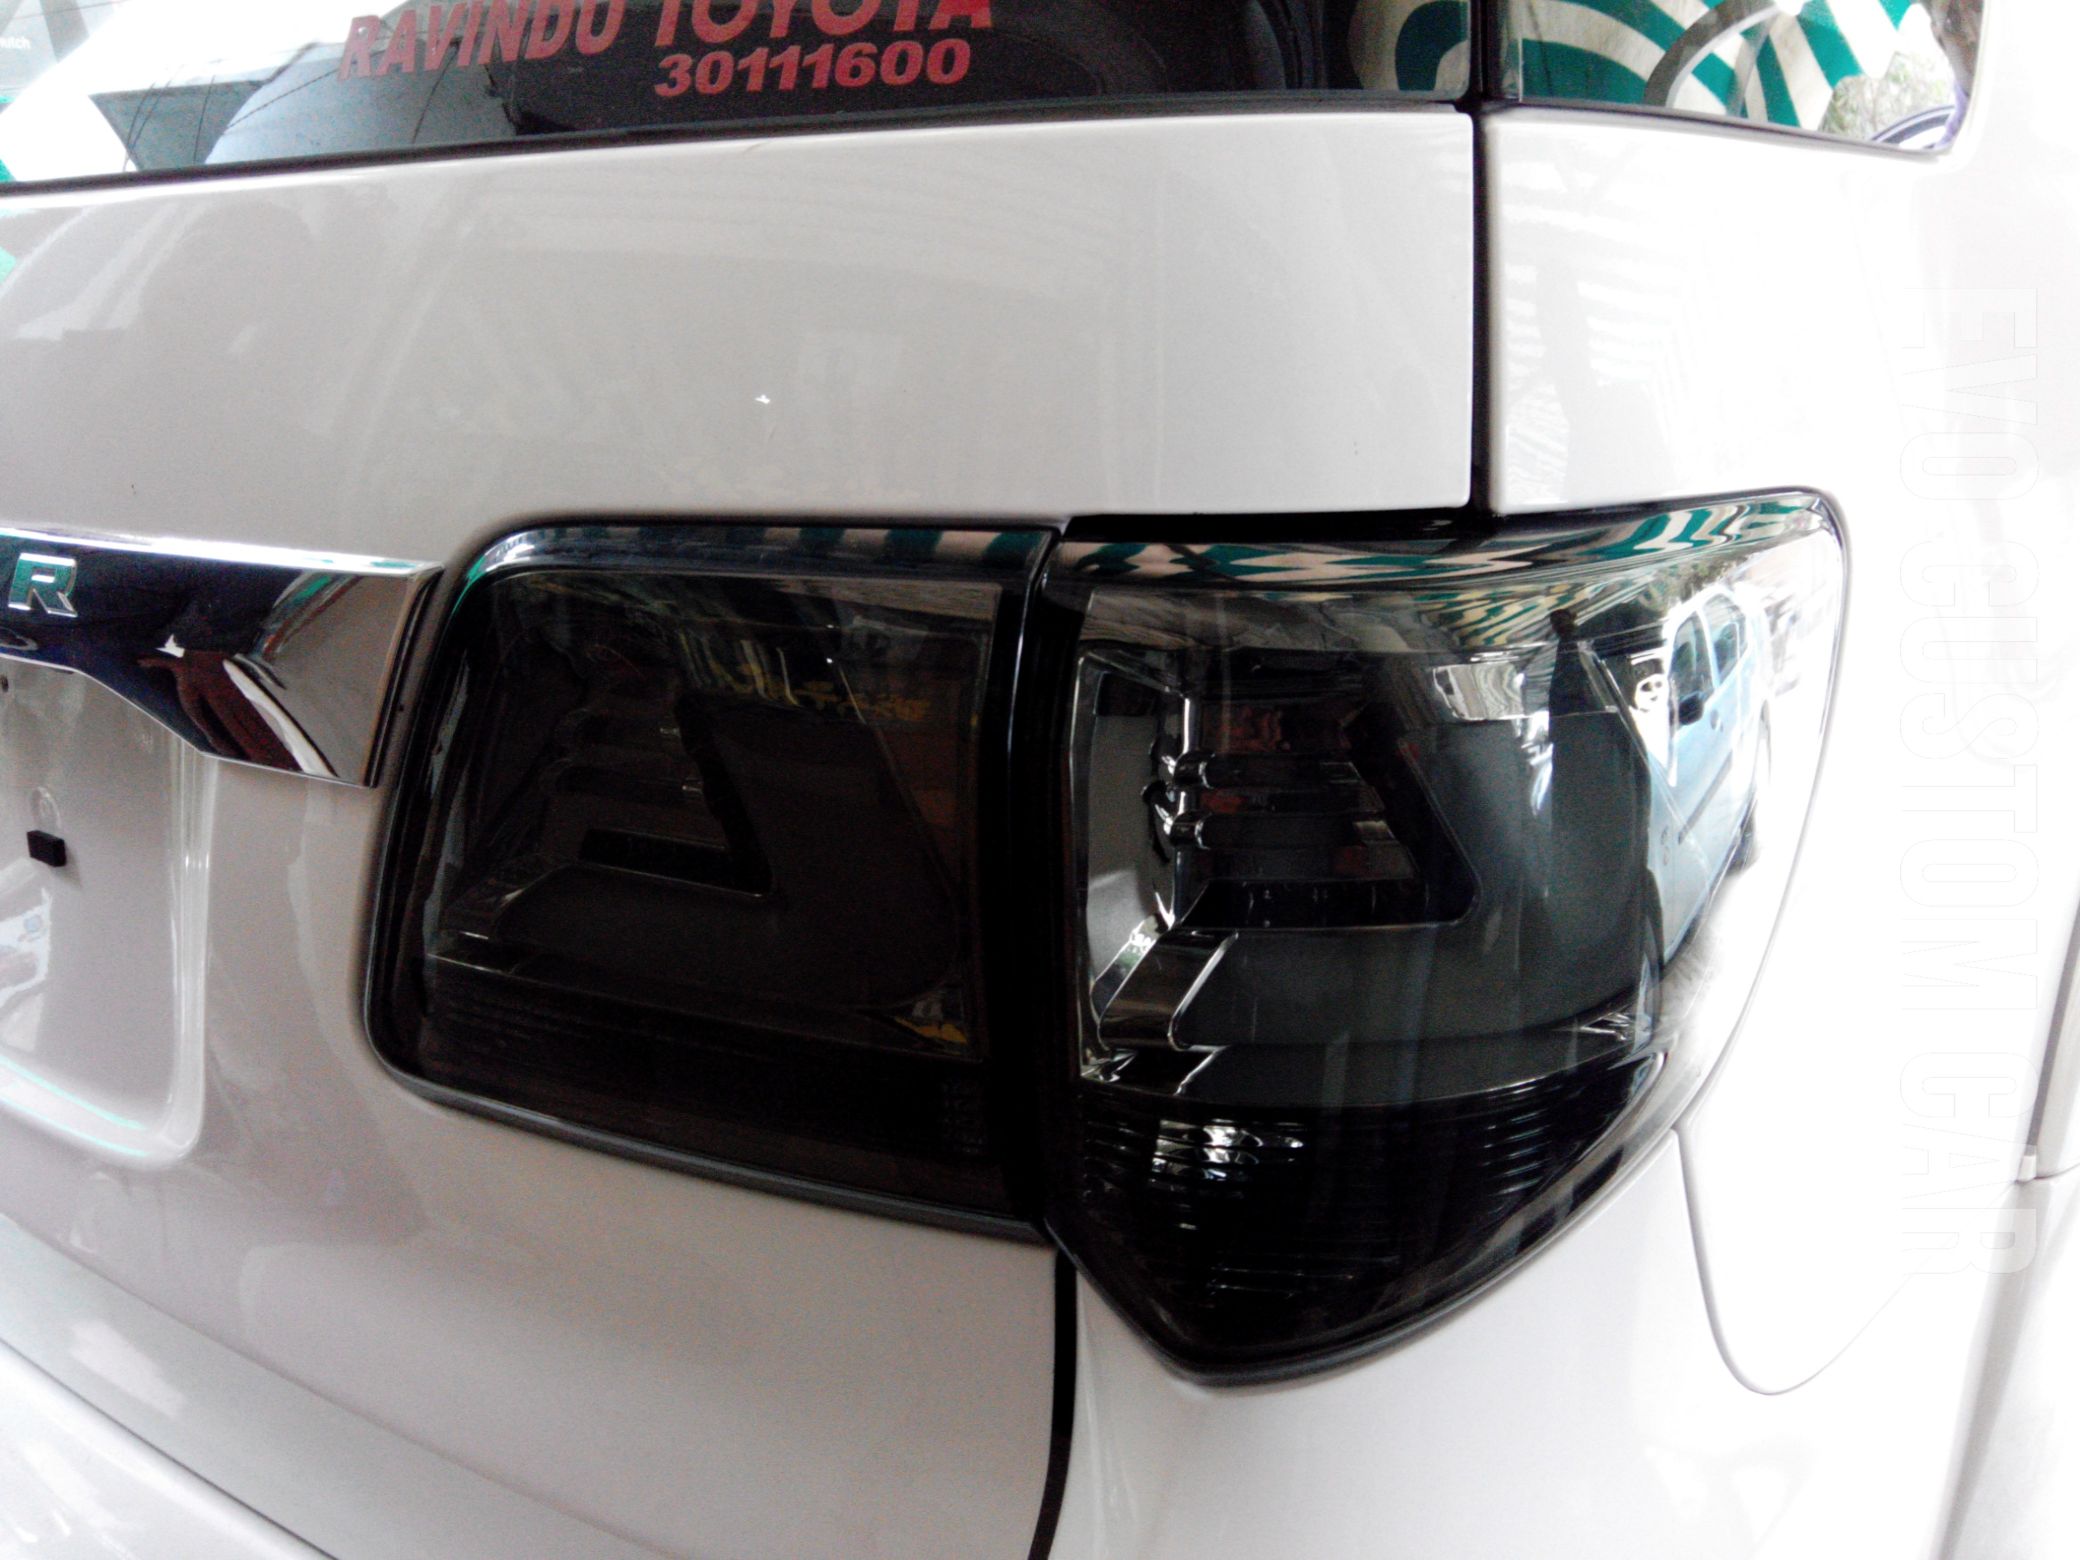 Toyota Fortuner (2012 to 2016) BMW Style LED Tail Lights